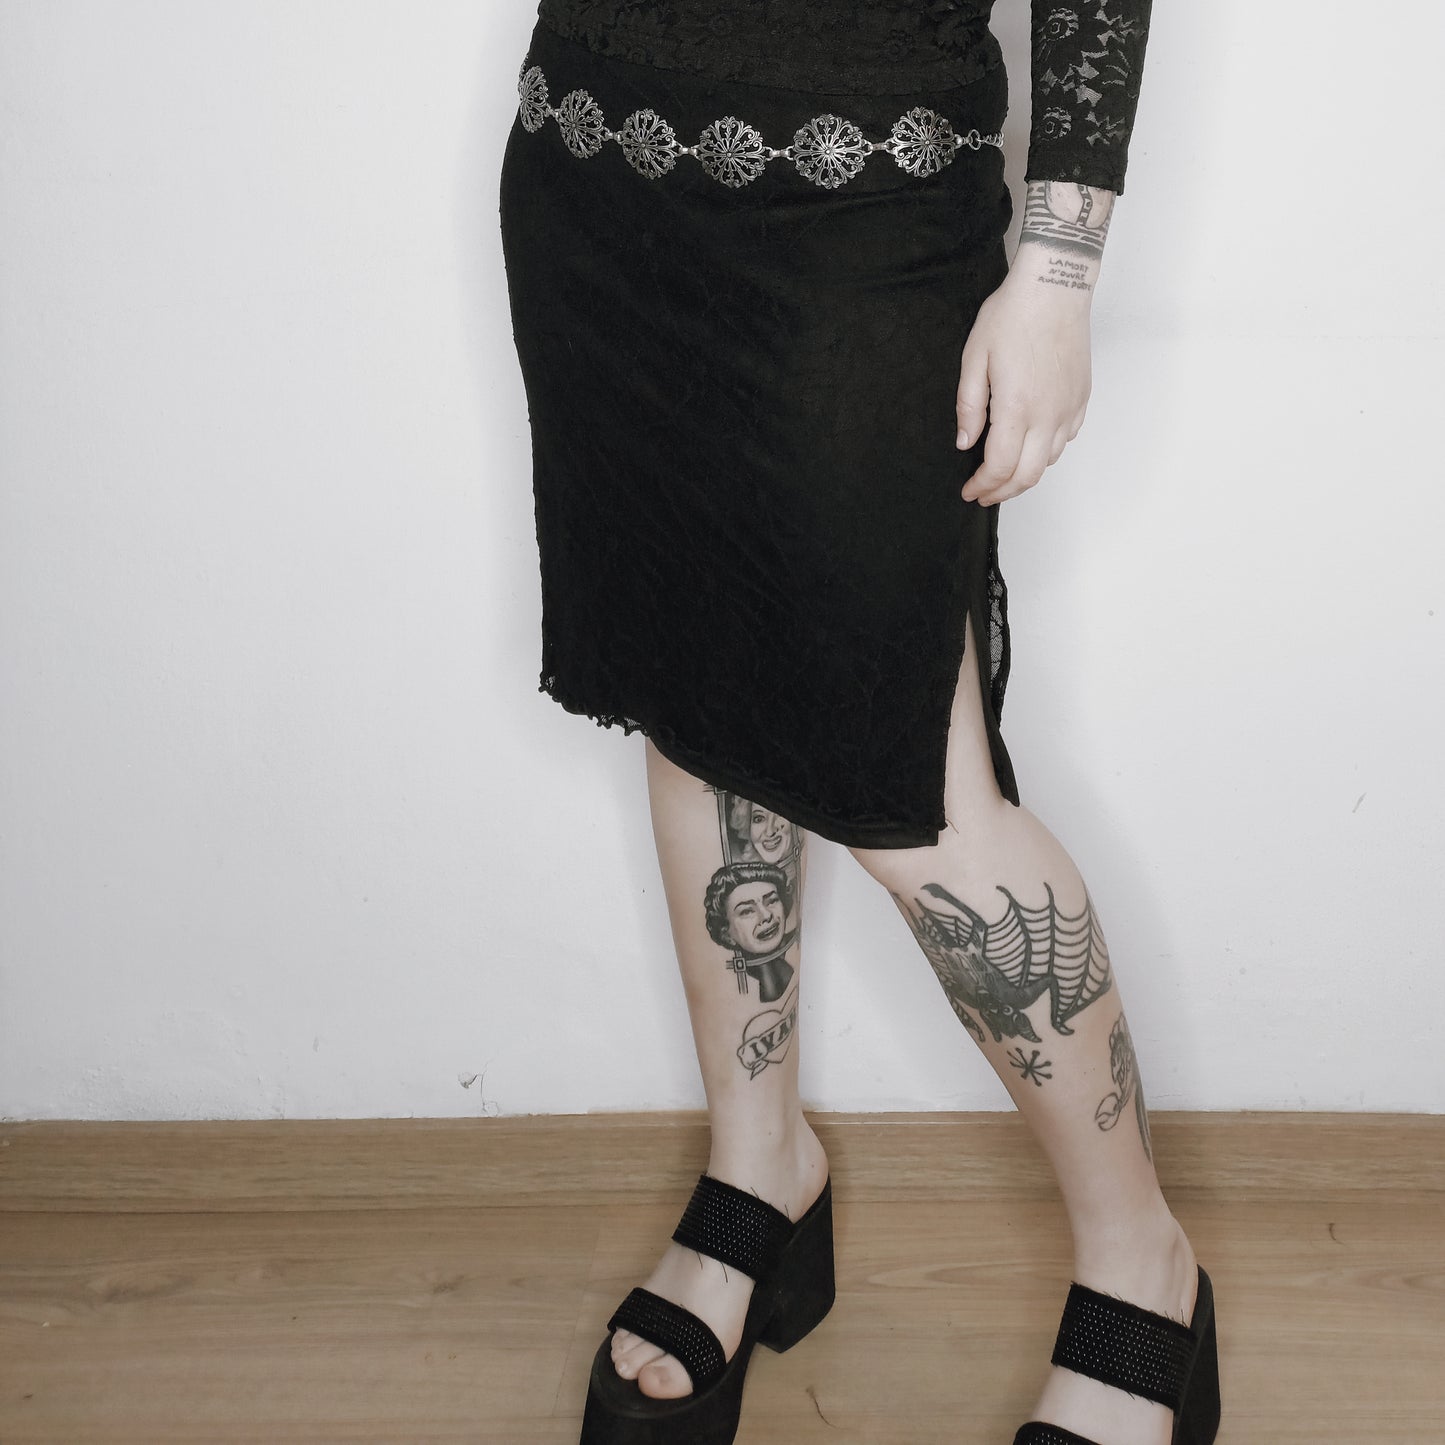 Mid Length Spiderweb Lined Skirt - S/M